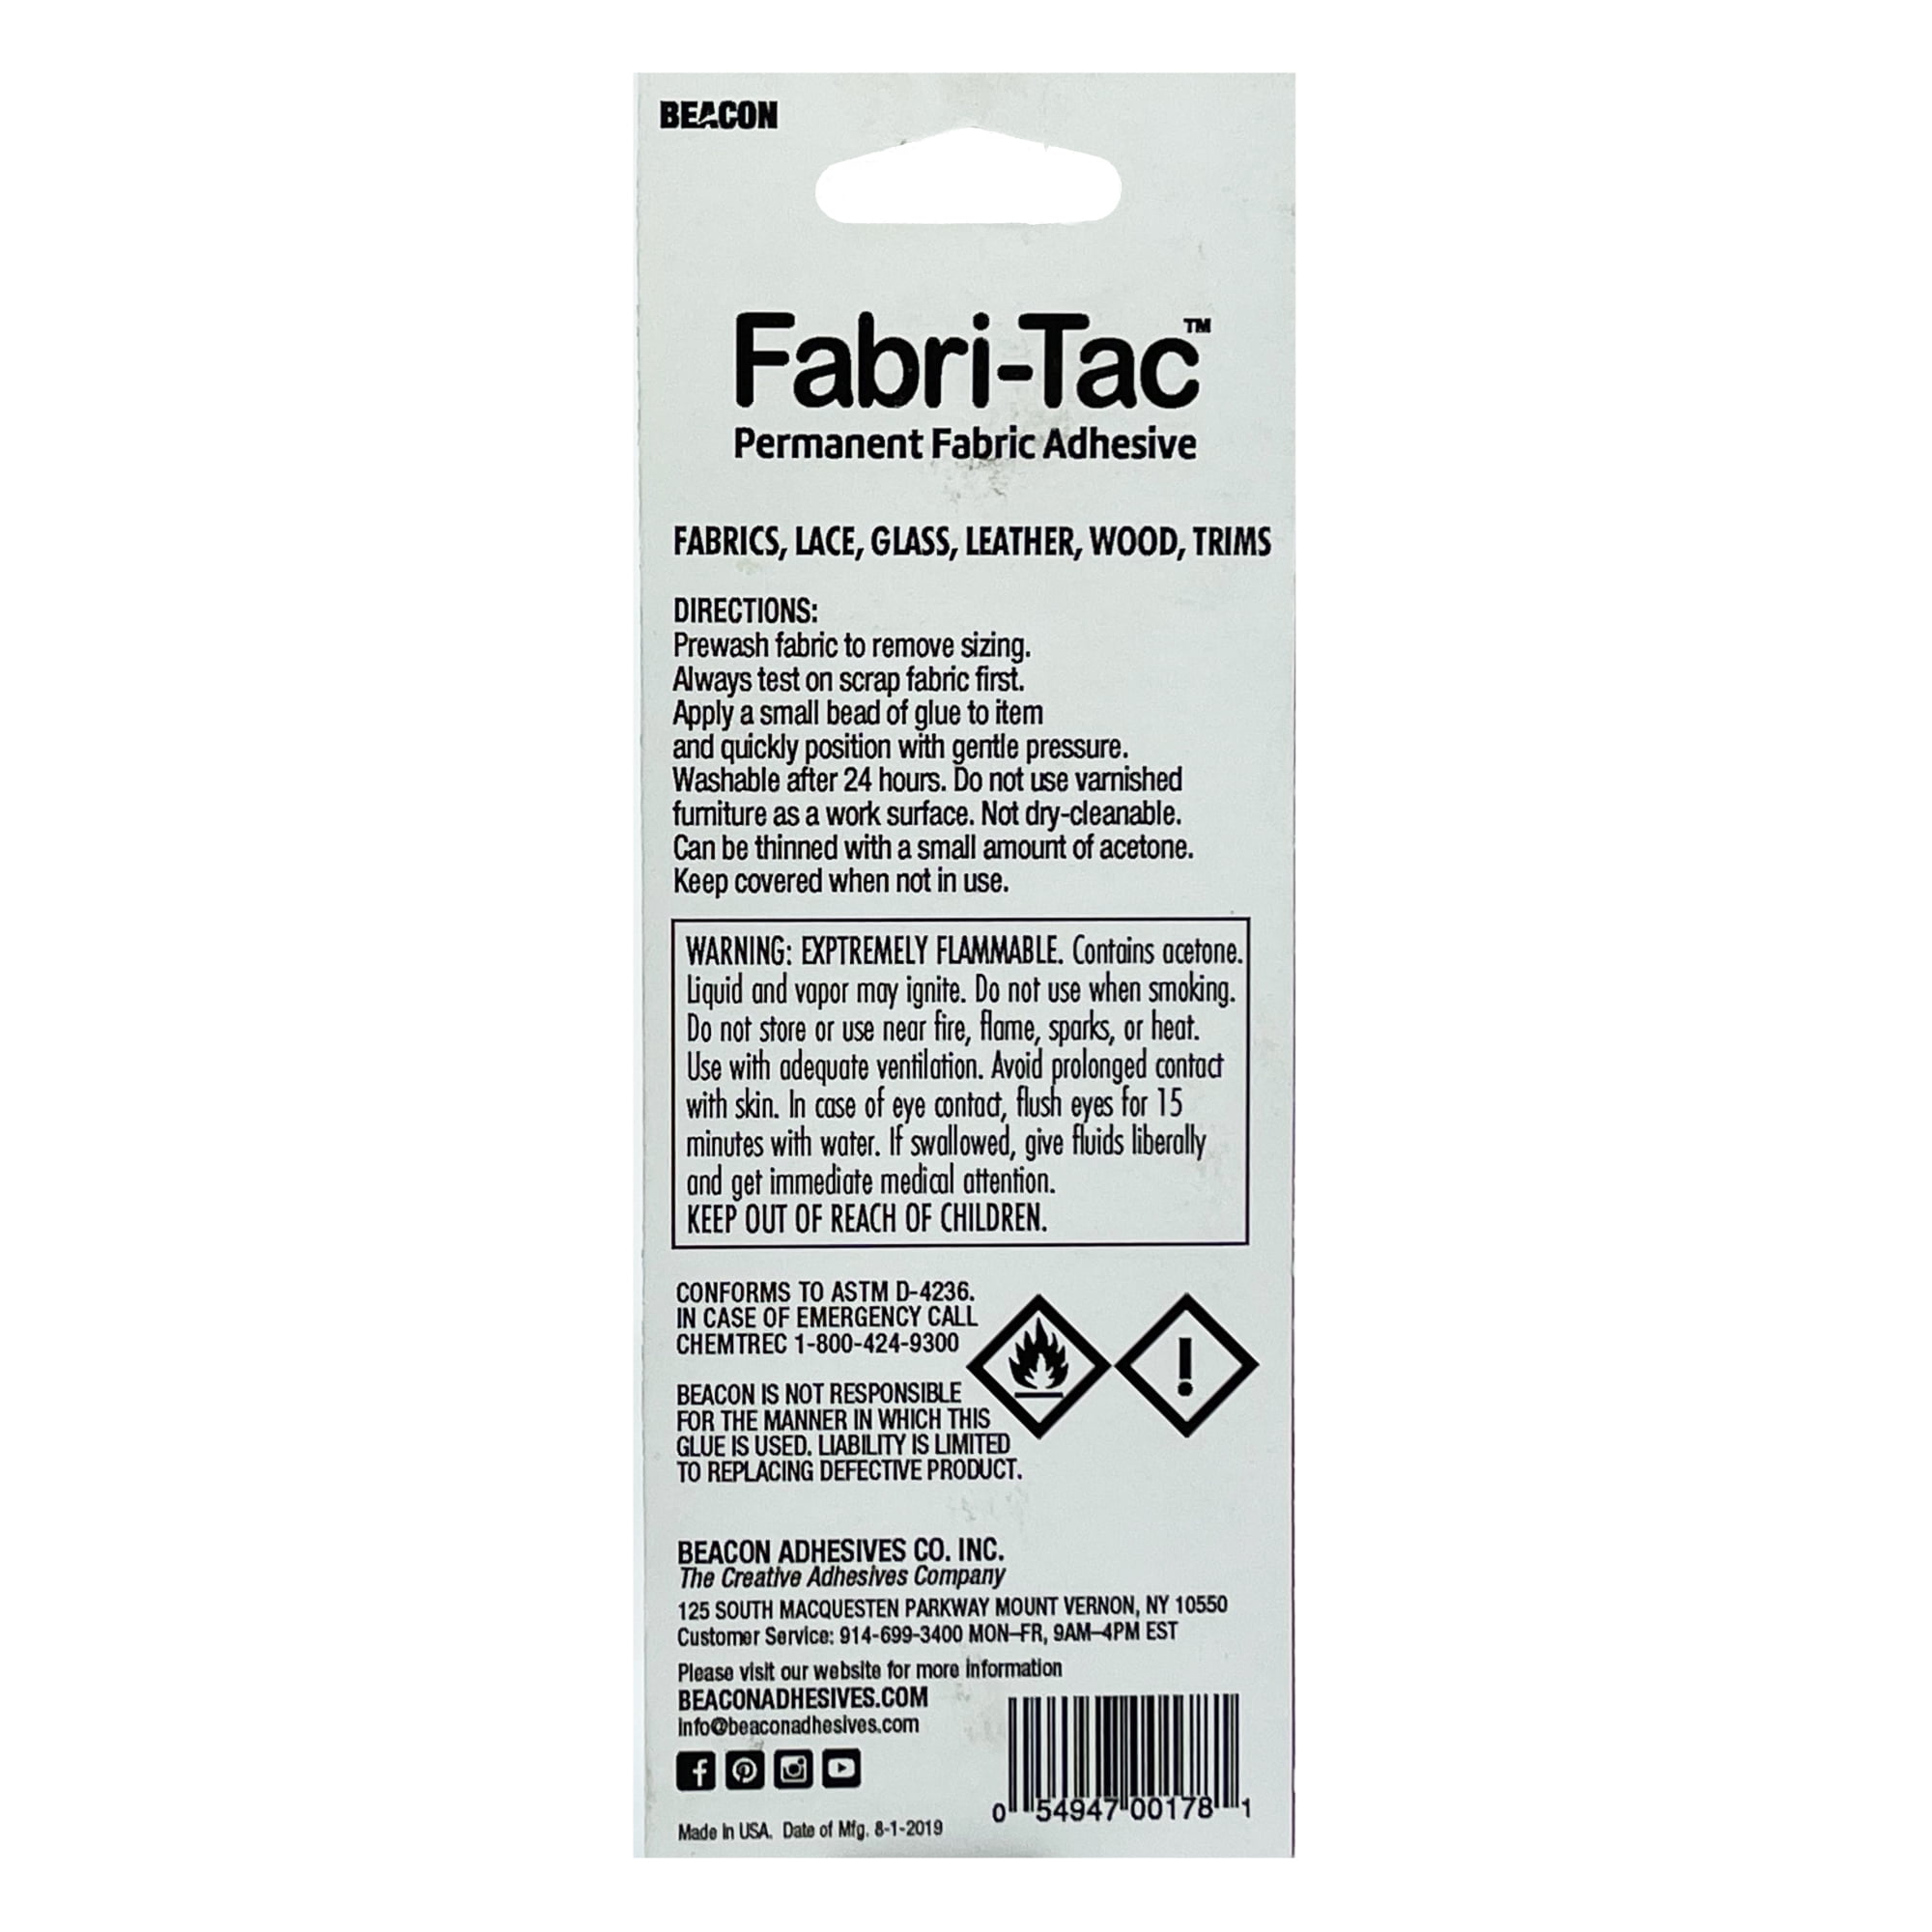 1oz Tube Fabri-Tac Adhesive – There's a fine line between having